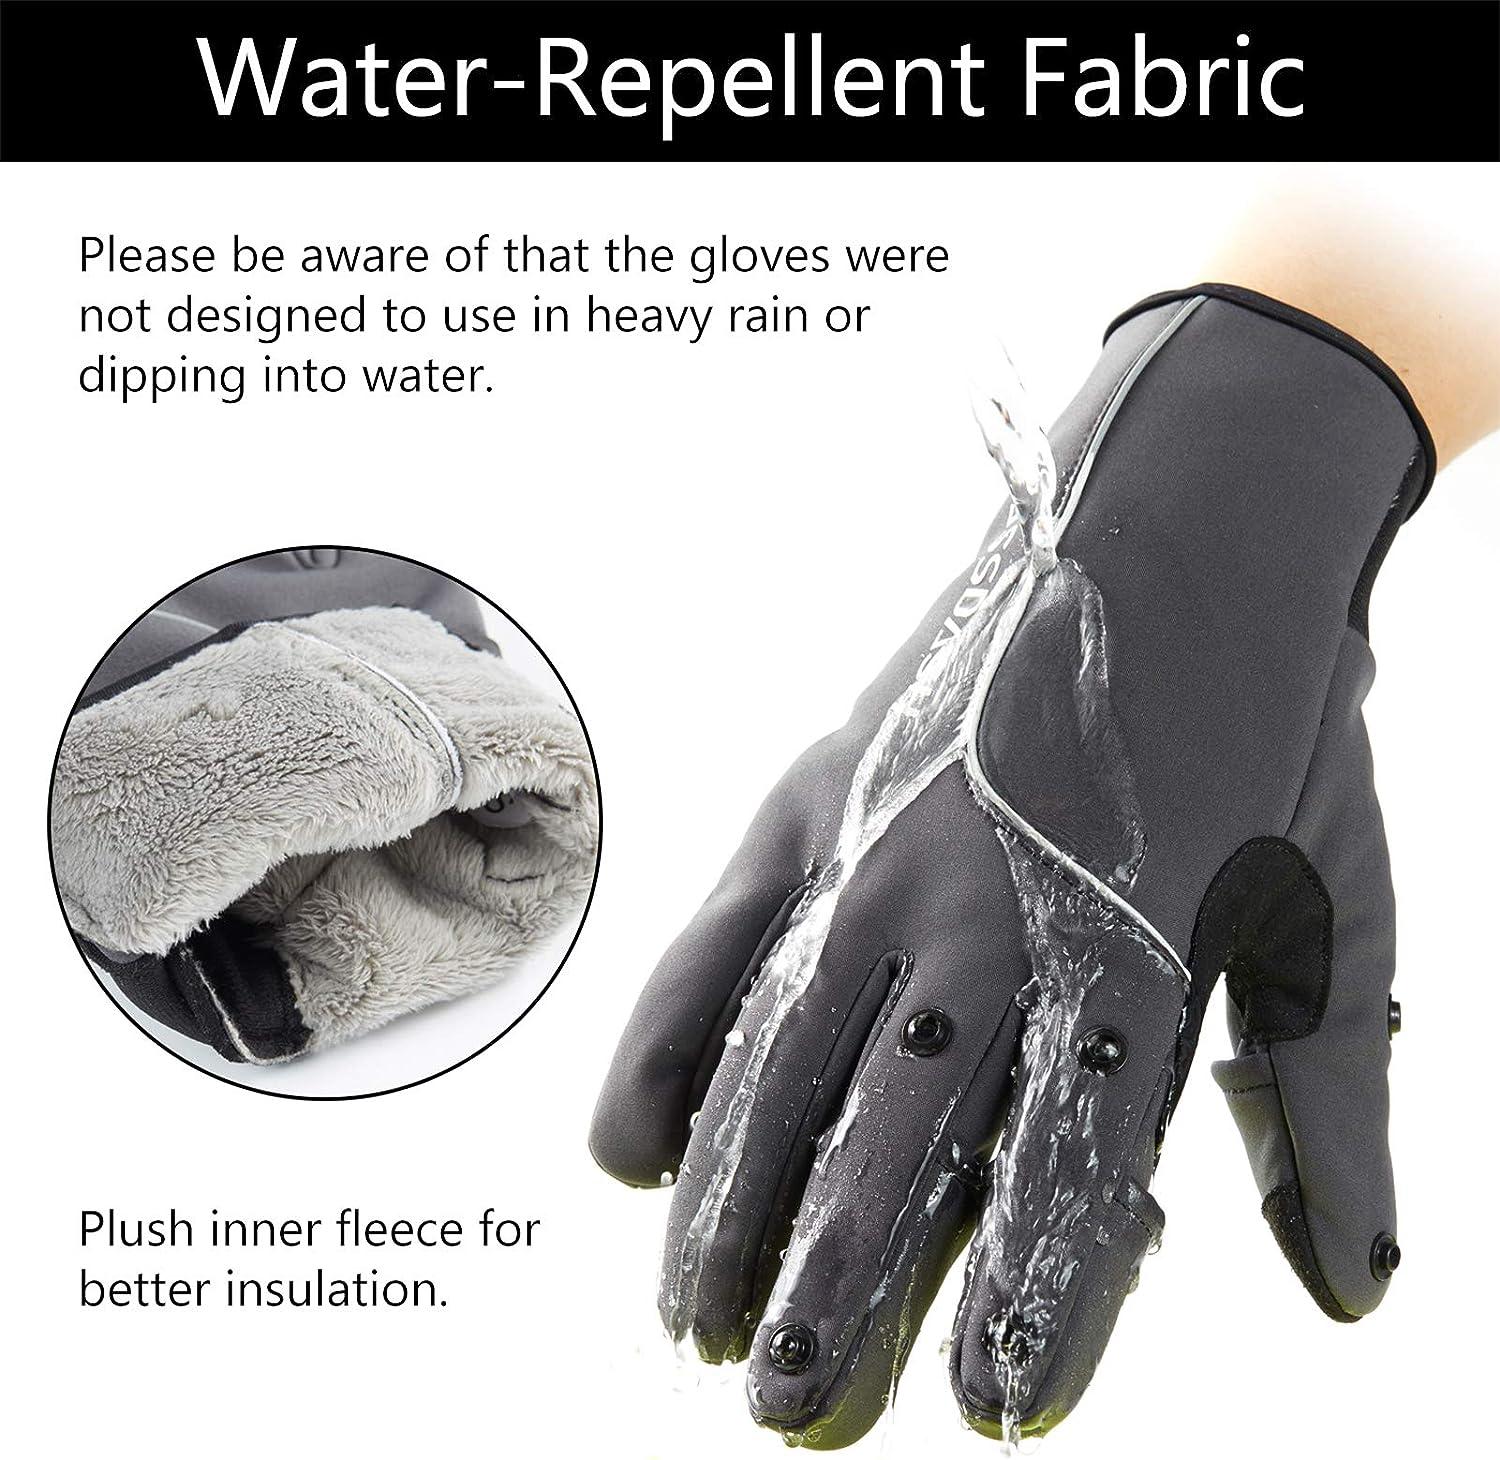 BASSDASH WintePro Insulated Fishing Gloves Water Repellent with Fleece  Lining Cold Weather Winter Gloves for Men Women Ice Fishing Hunting  Photography Hiking Grey X-Large